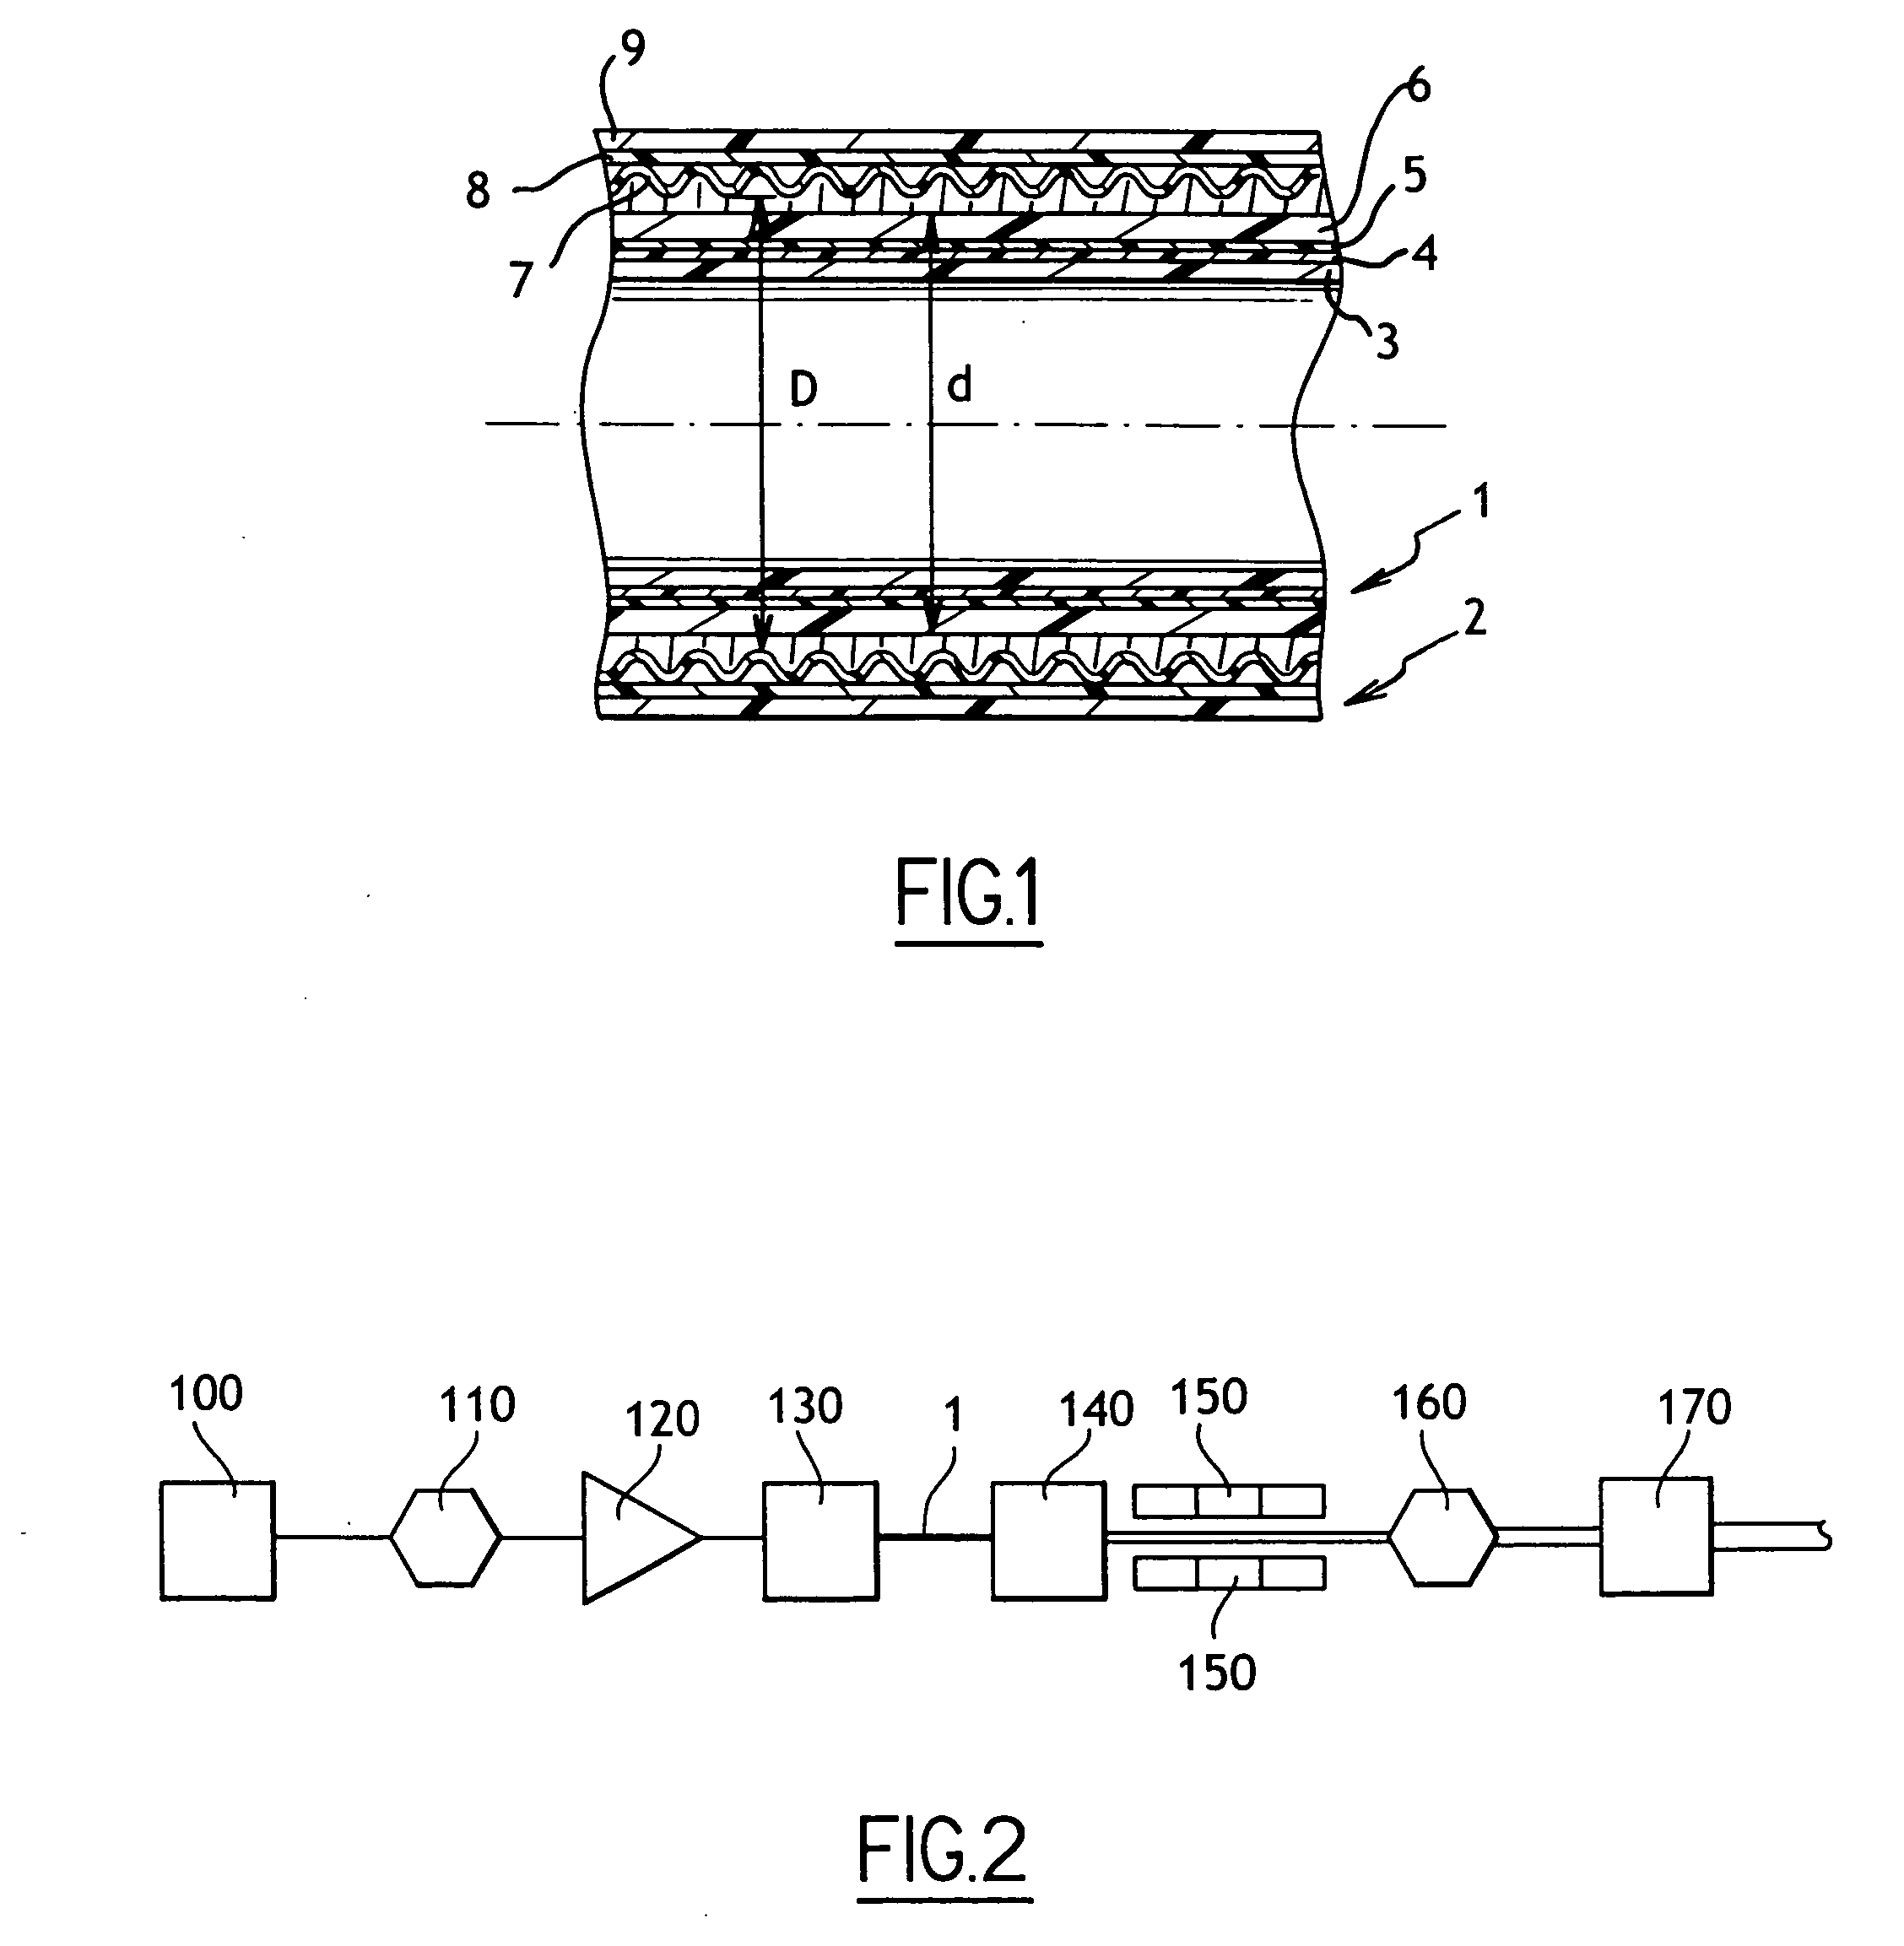 Underground pipe for transporting fuel and a method of fabricating it